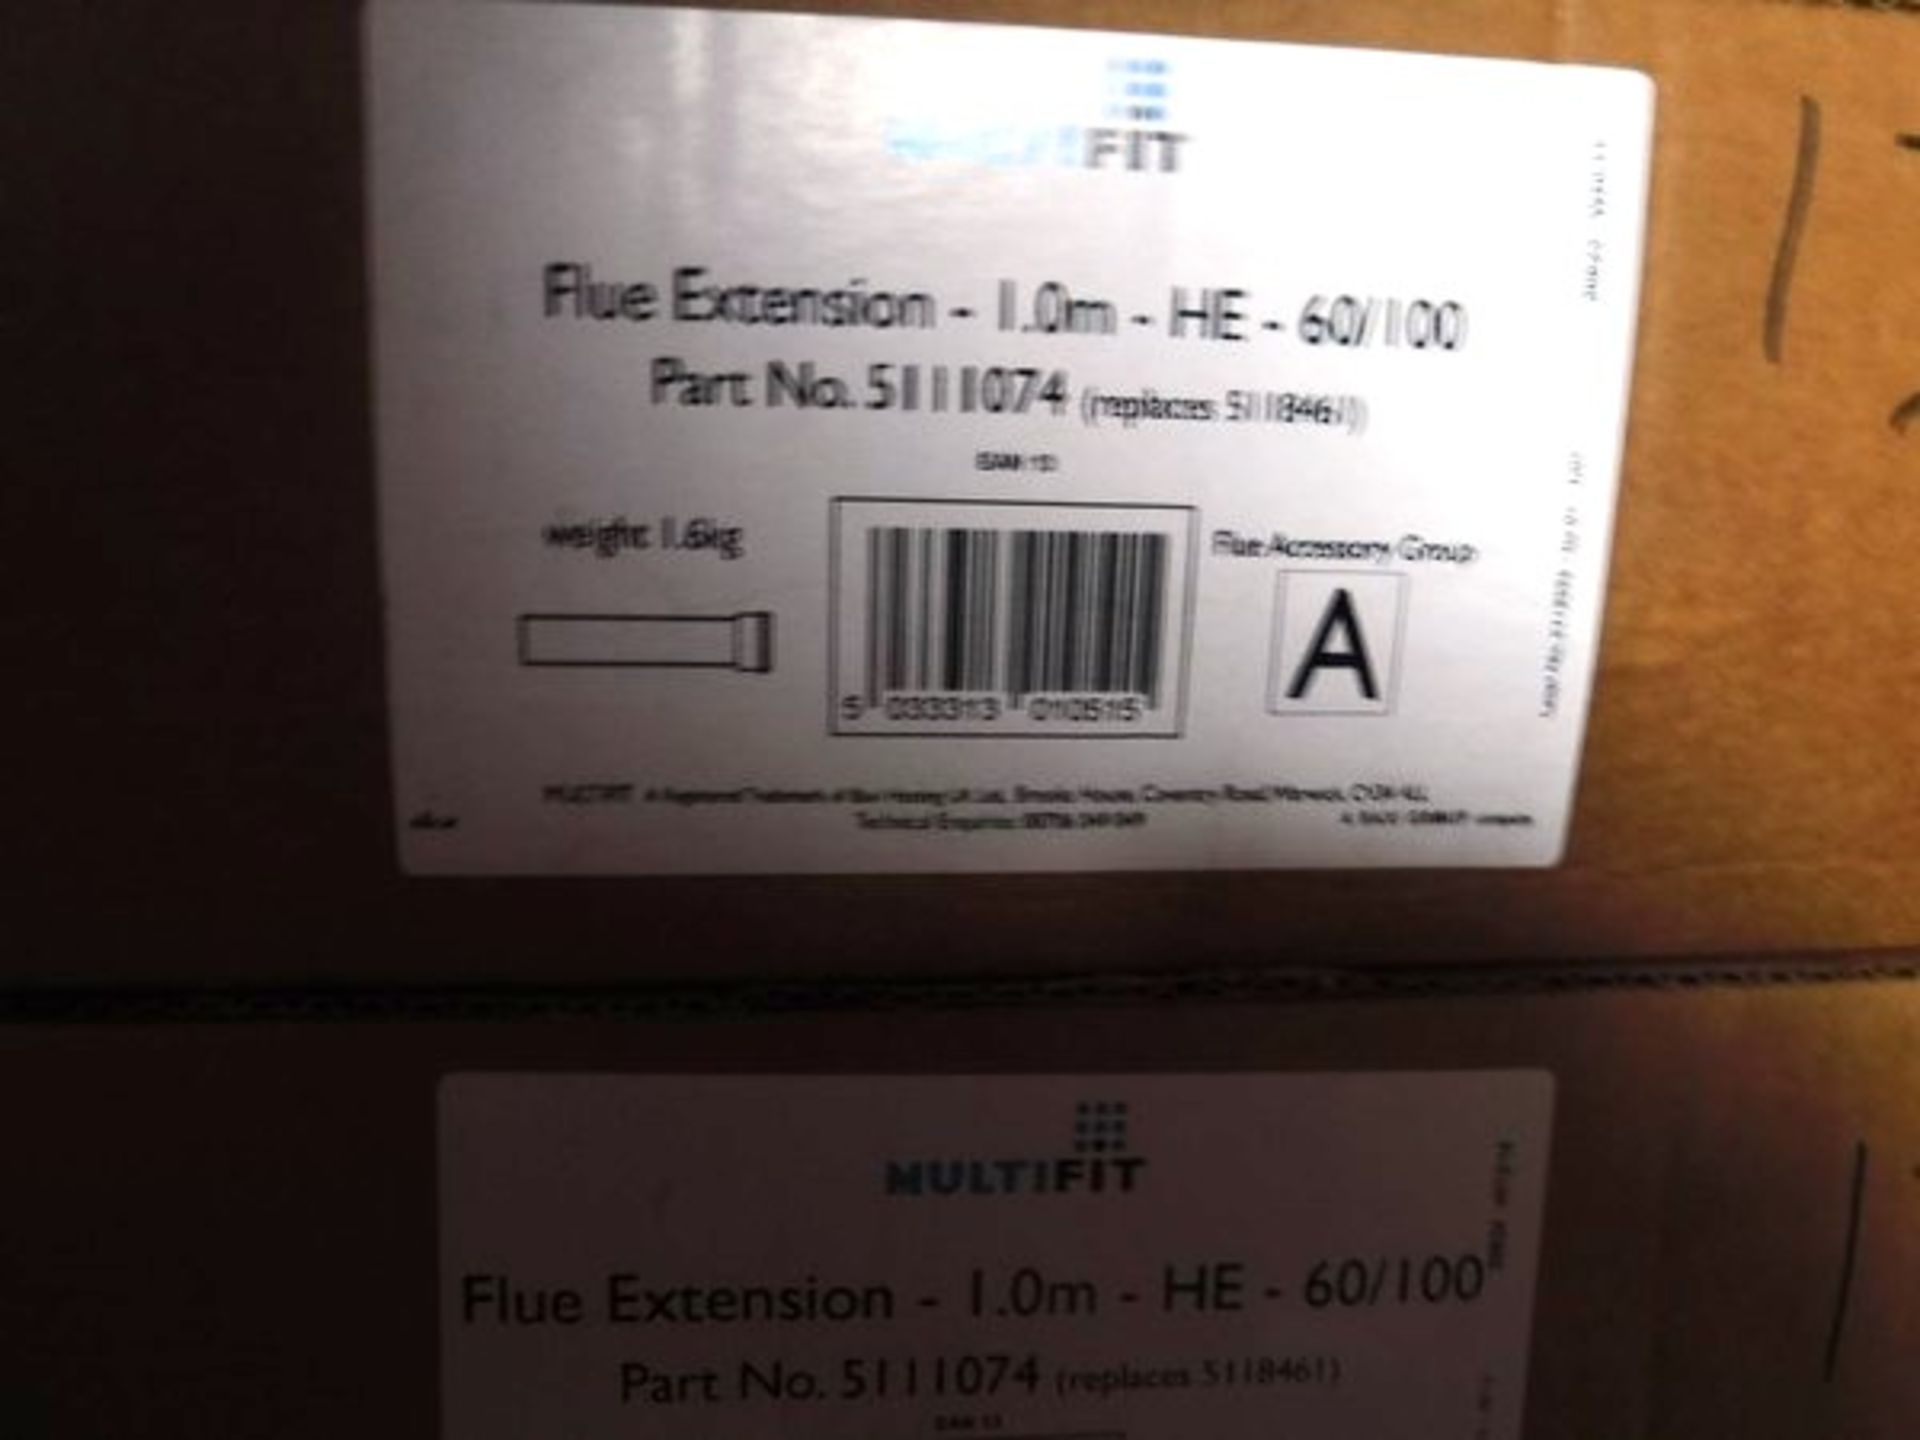 16 MULTIFIT 5111074 FLUE EXTENSIONS 1.0M HE / 60 / 100 - Image 3 of 4